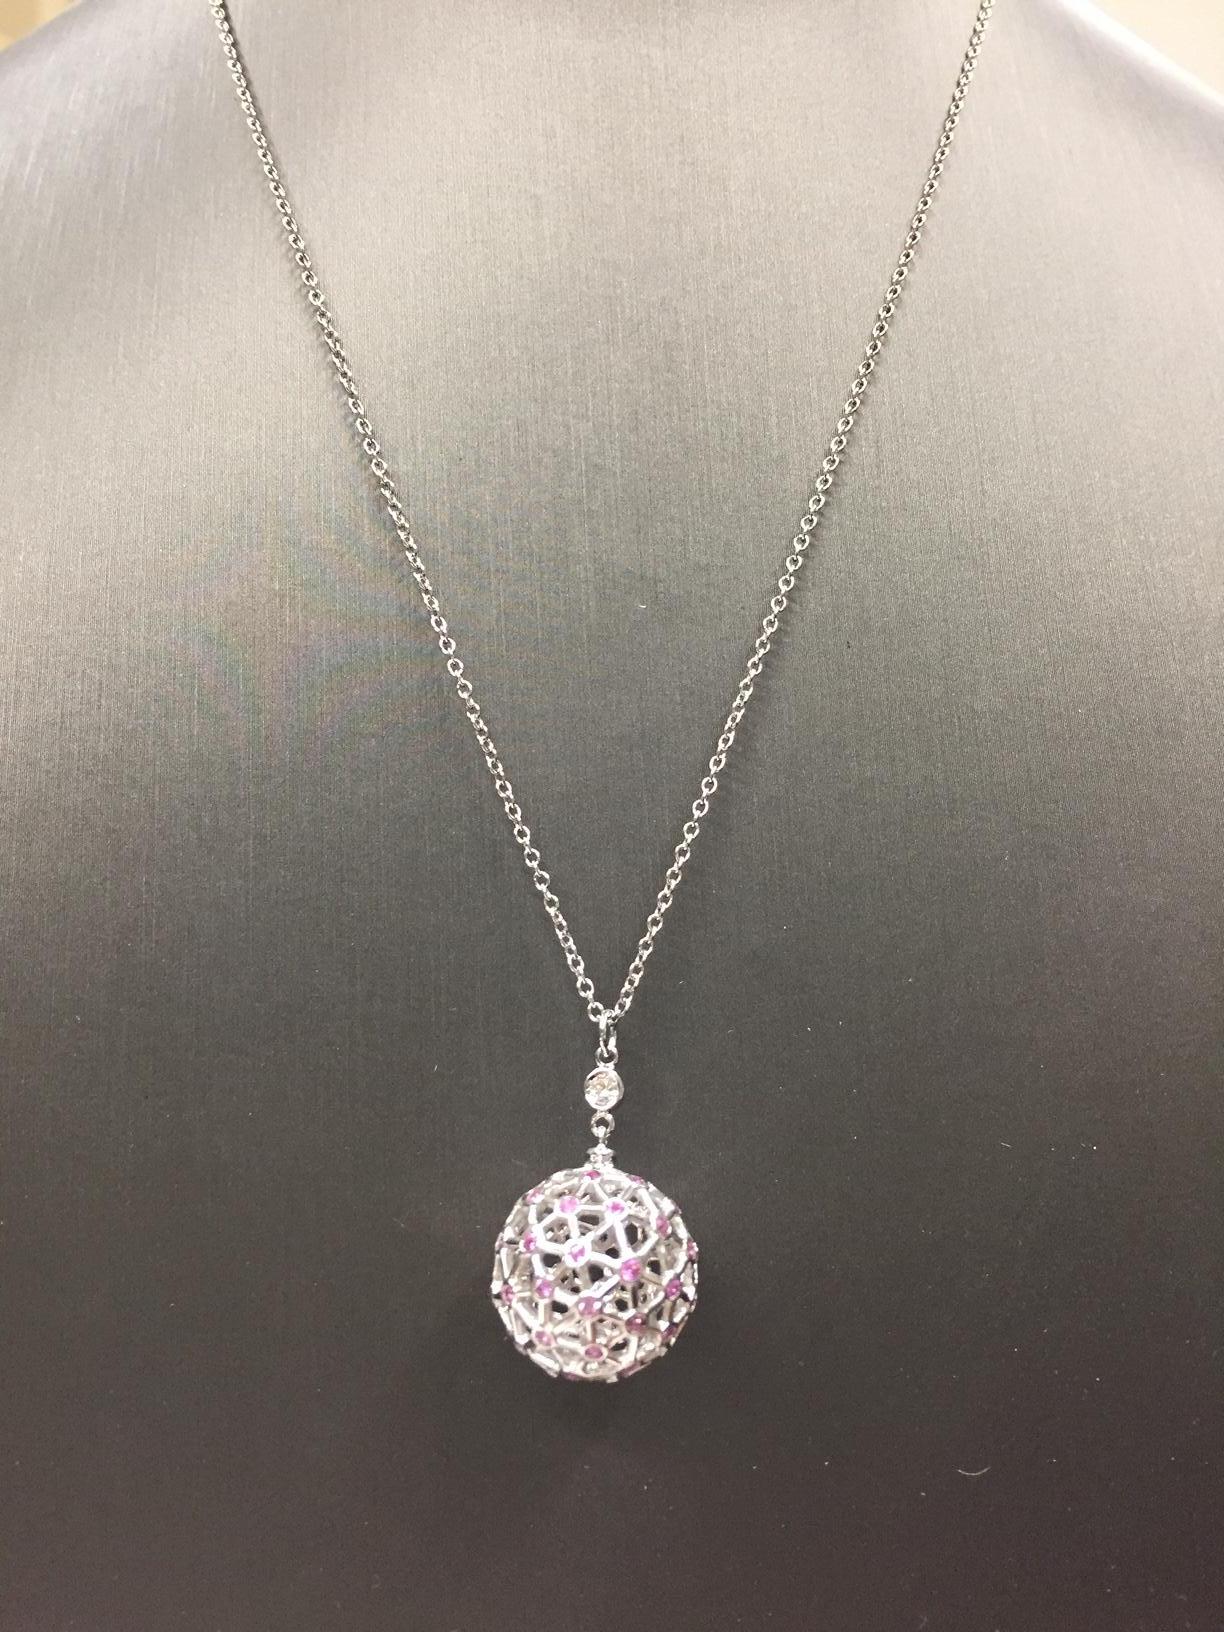 18 Karat White Gold Diamond and Pink Sapphires Garavelli Globo Pendant Necklace In New Condition For Sale In Valenza, IT